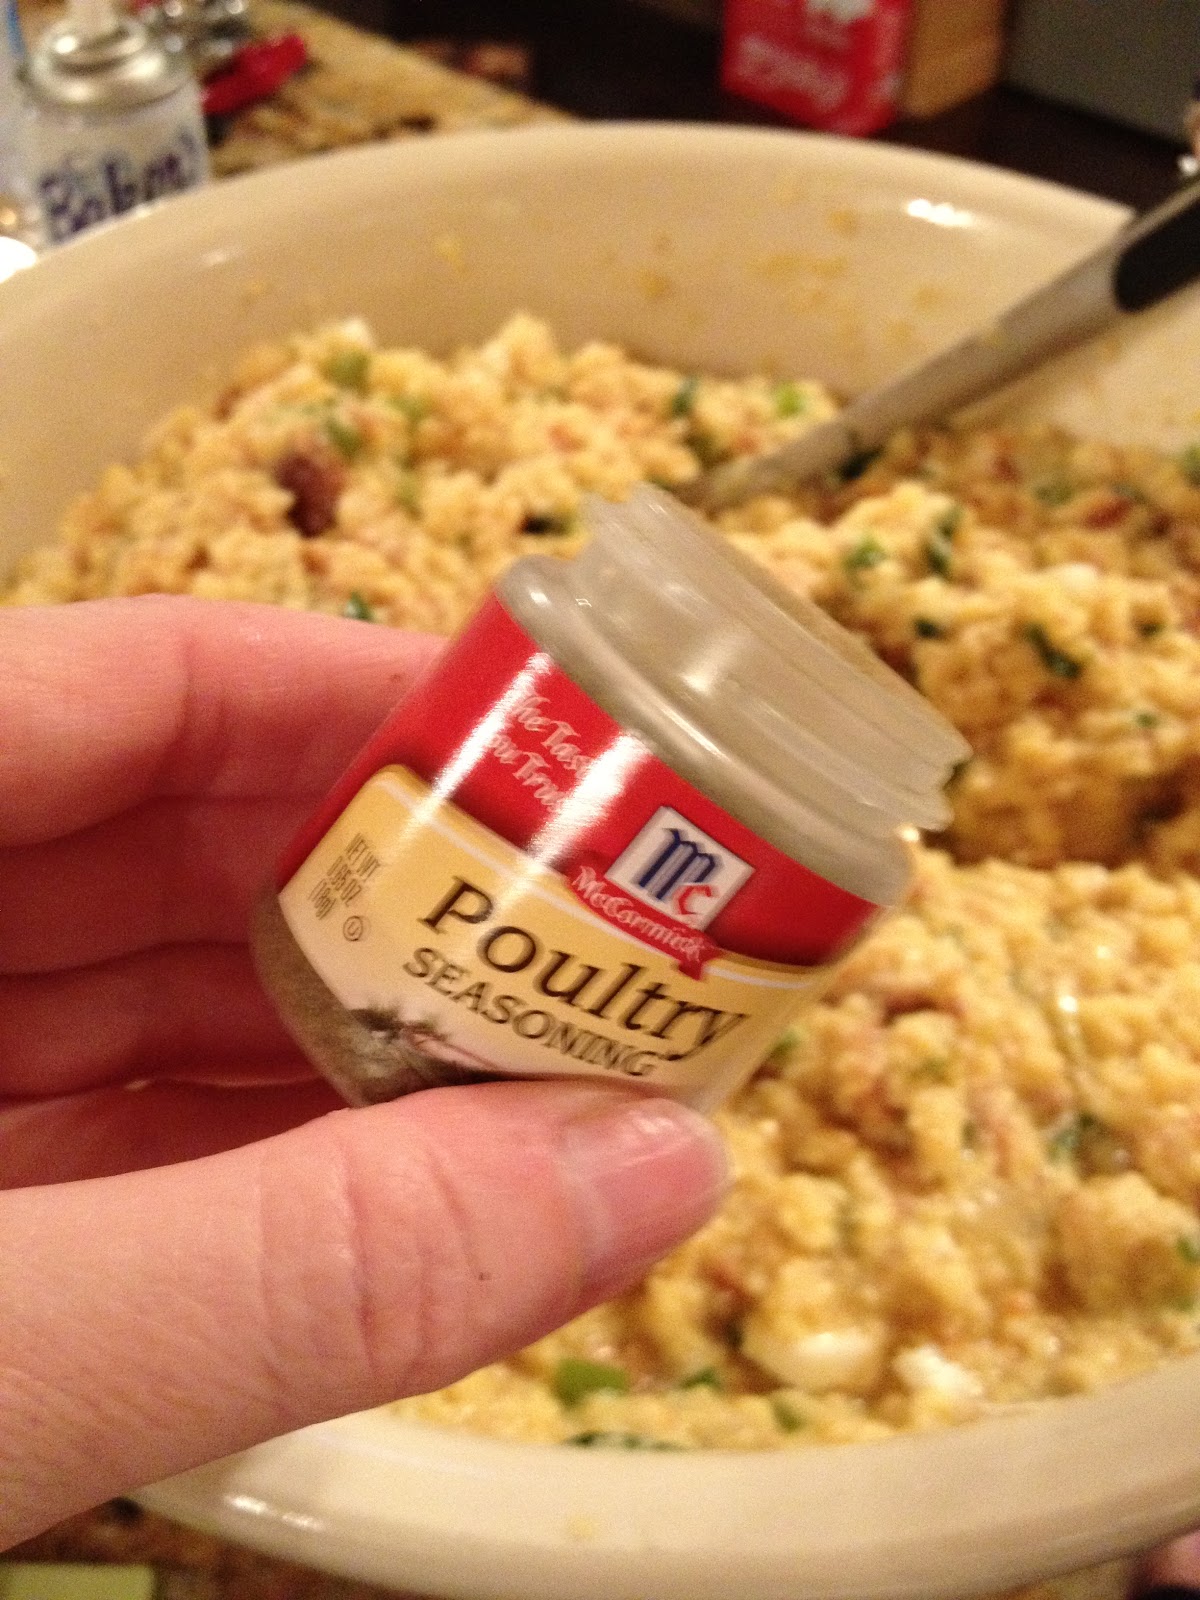 How Much Poultry Seasoning For Chicken Soup